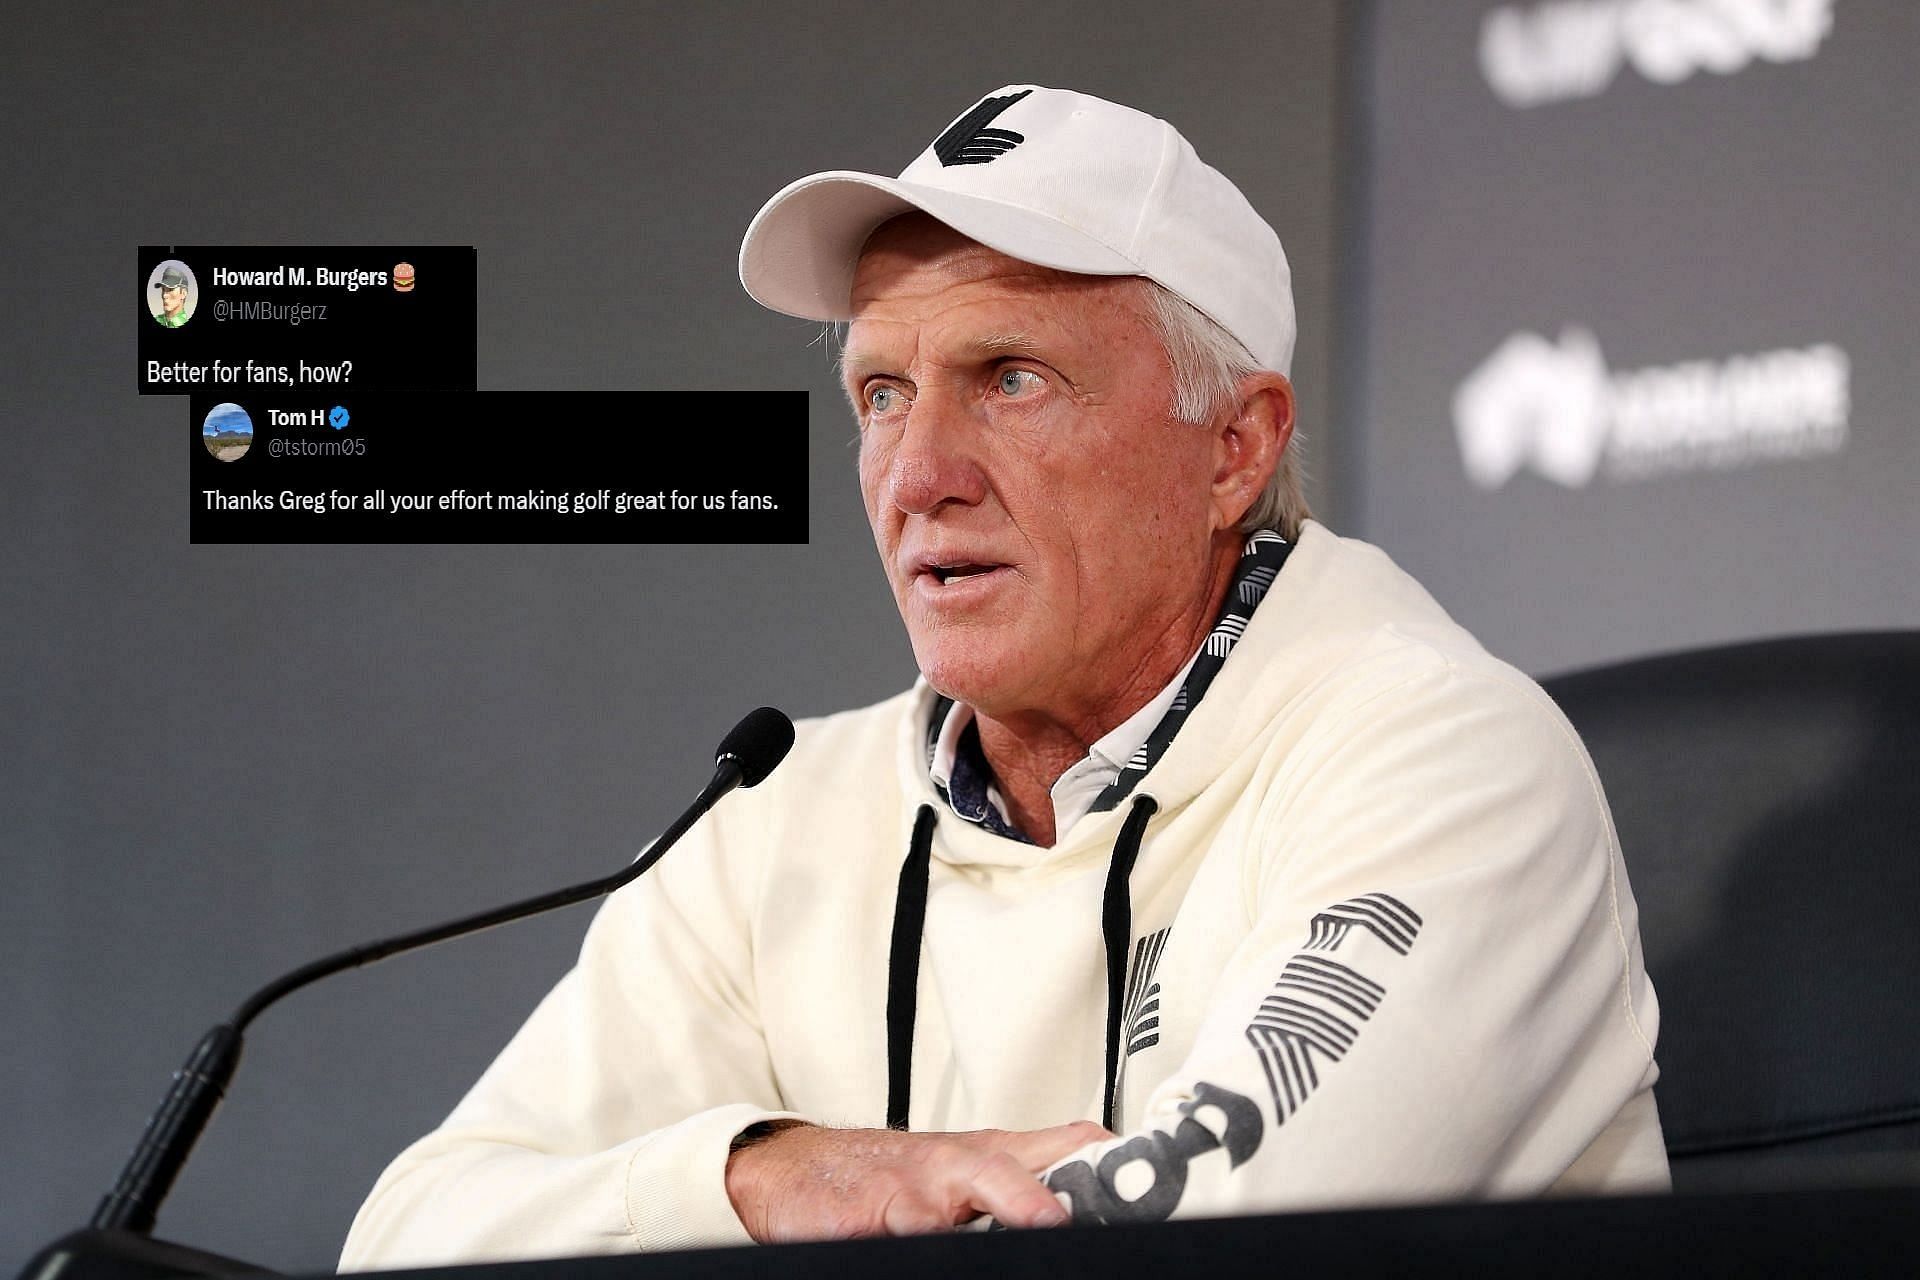 Greg Norman reflected on the achievements of past year